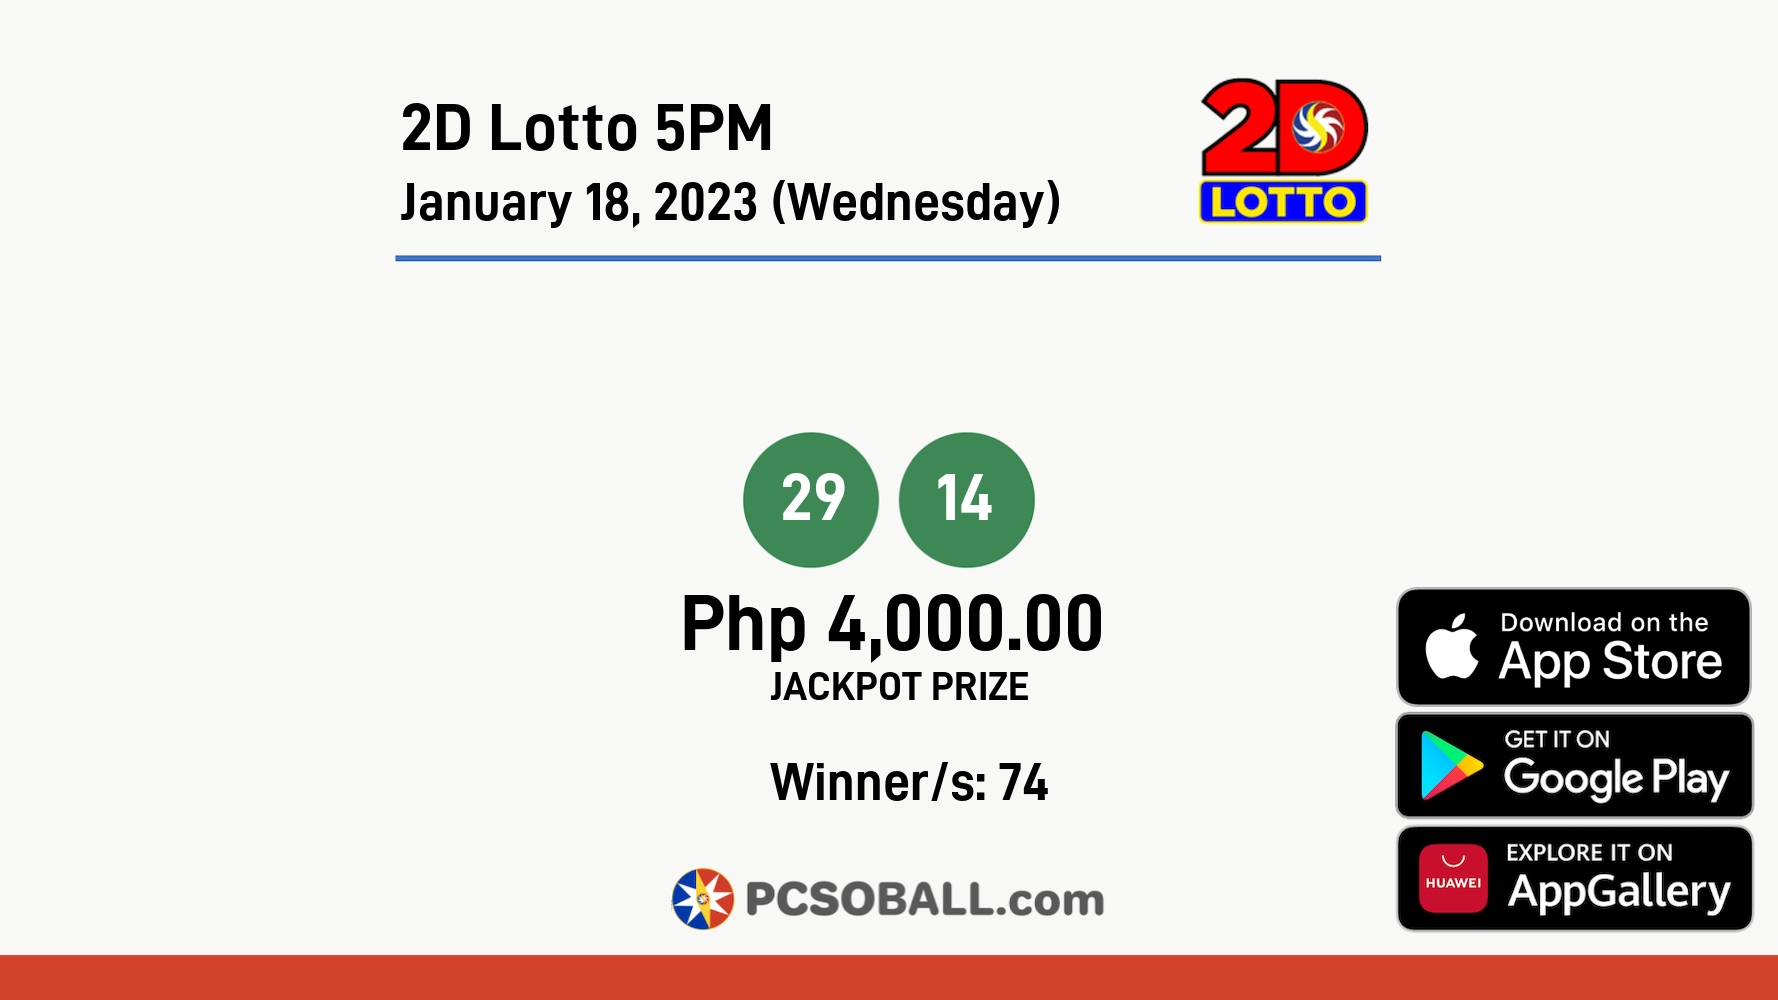 2D Lotto 5PM January 18, 2023 (Wednesday) Result